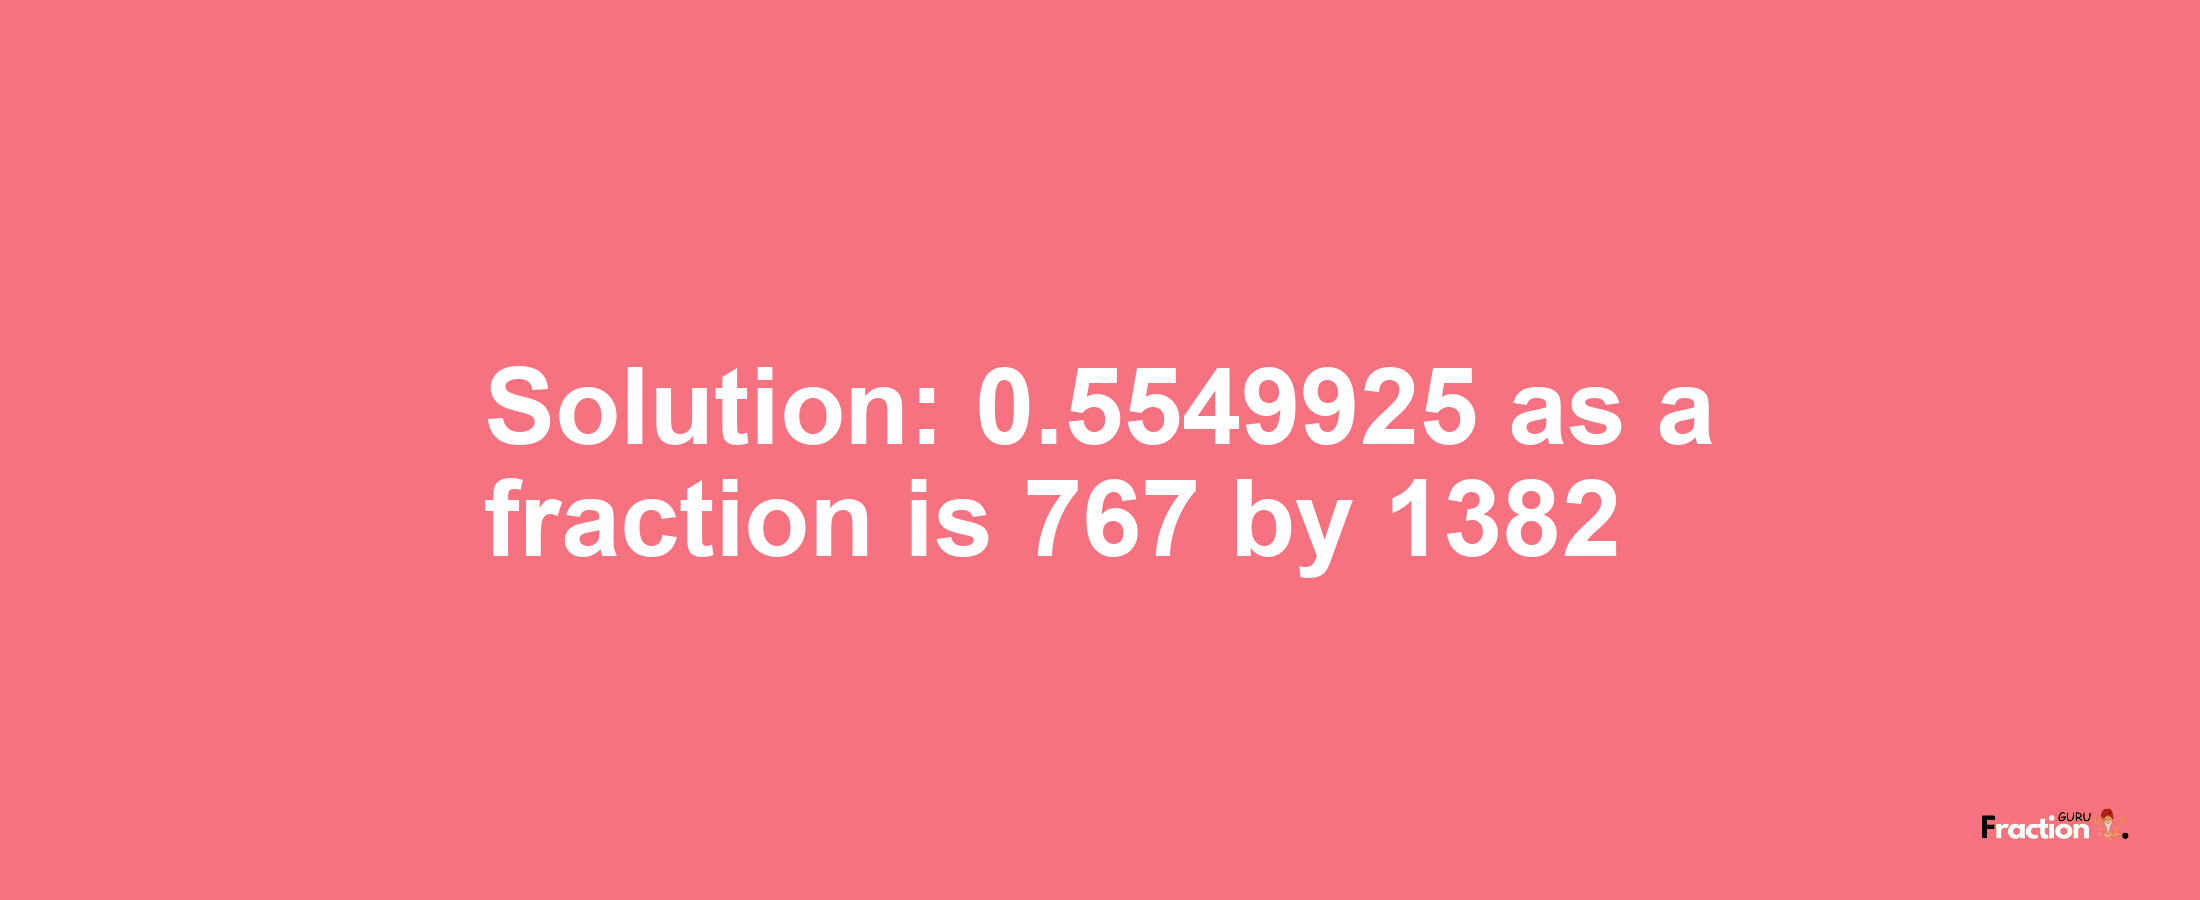 Solution:0.5549925 as a fraction is 767/1382